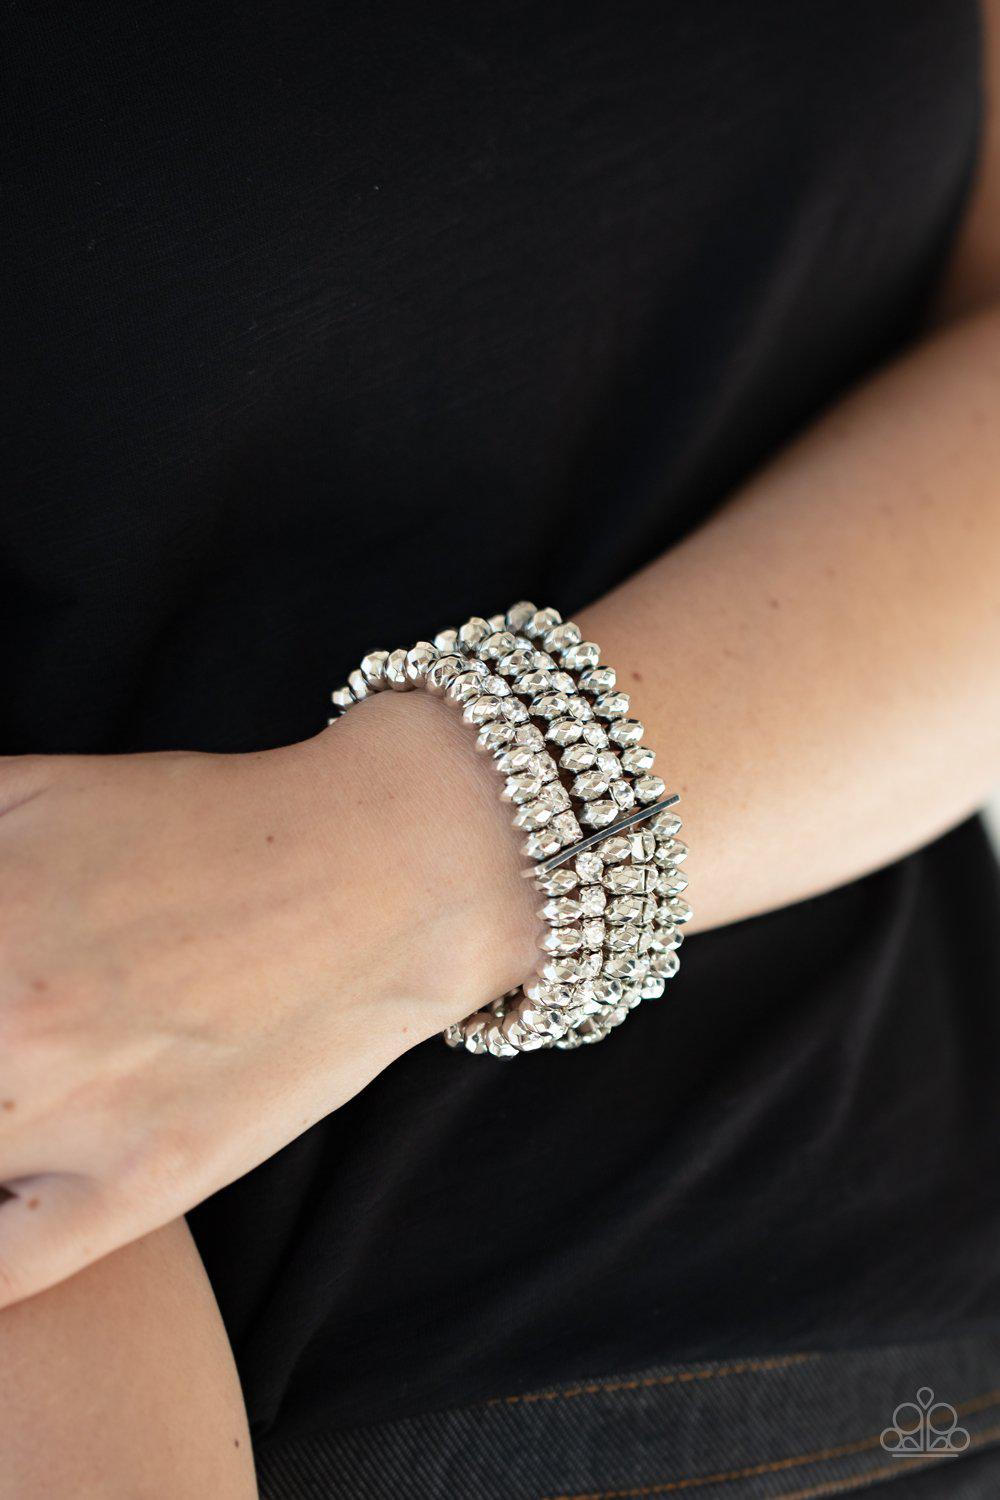 Best of LUXE White Rhinestone and Silver Stacked Bracelet - Paparazzi Accessories LOTP Exclusive March 2021 - model -CarasShop.com - $5 Jewelry by Cara Jewels